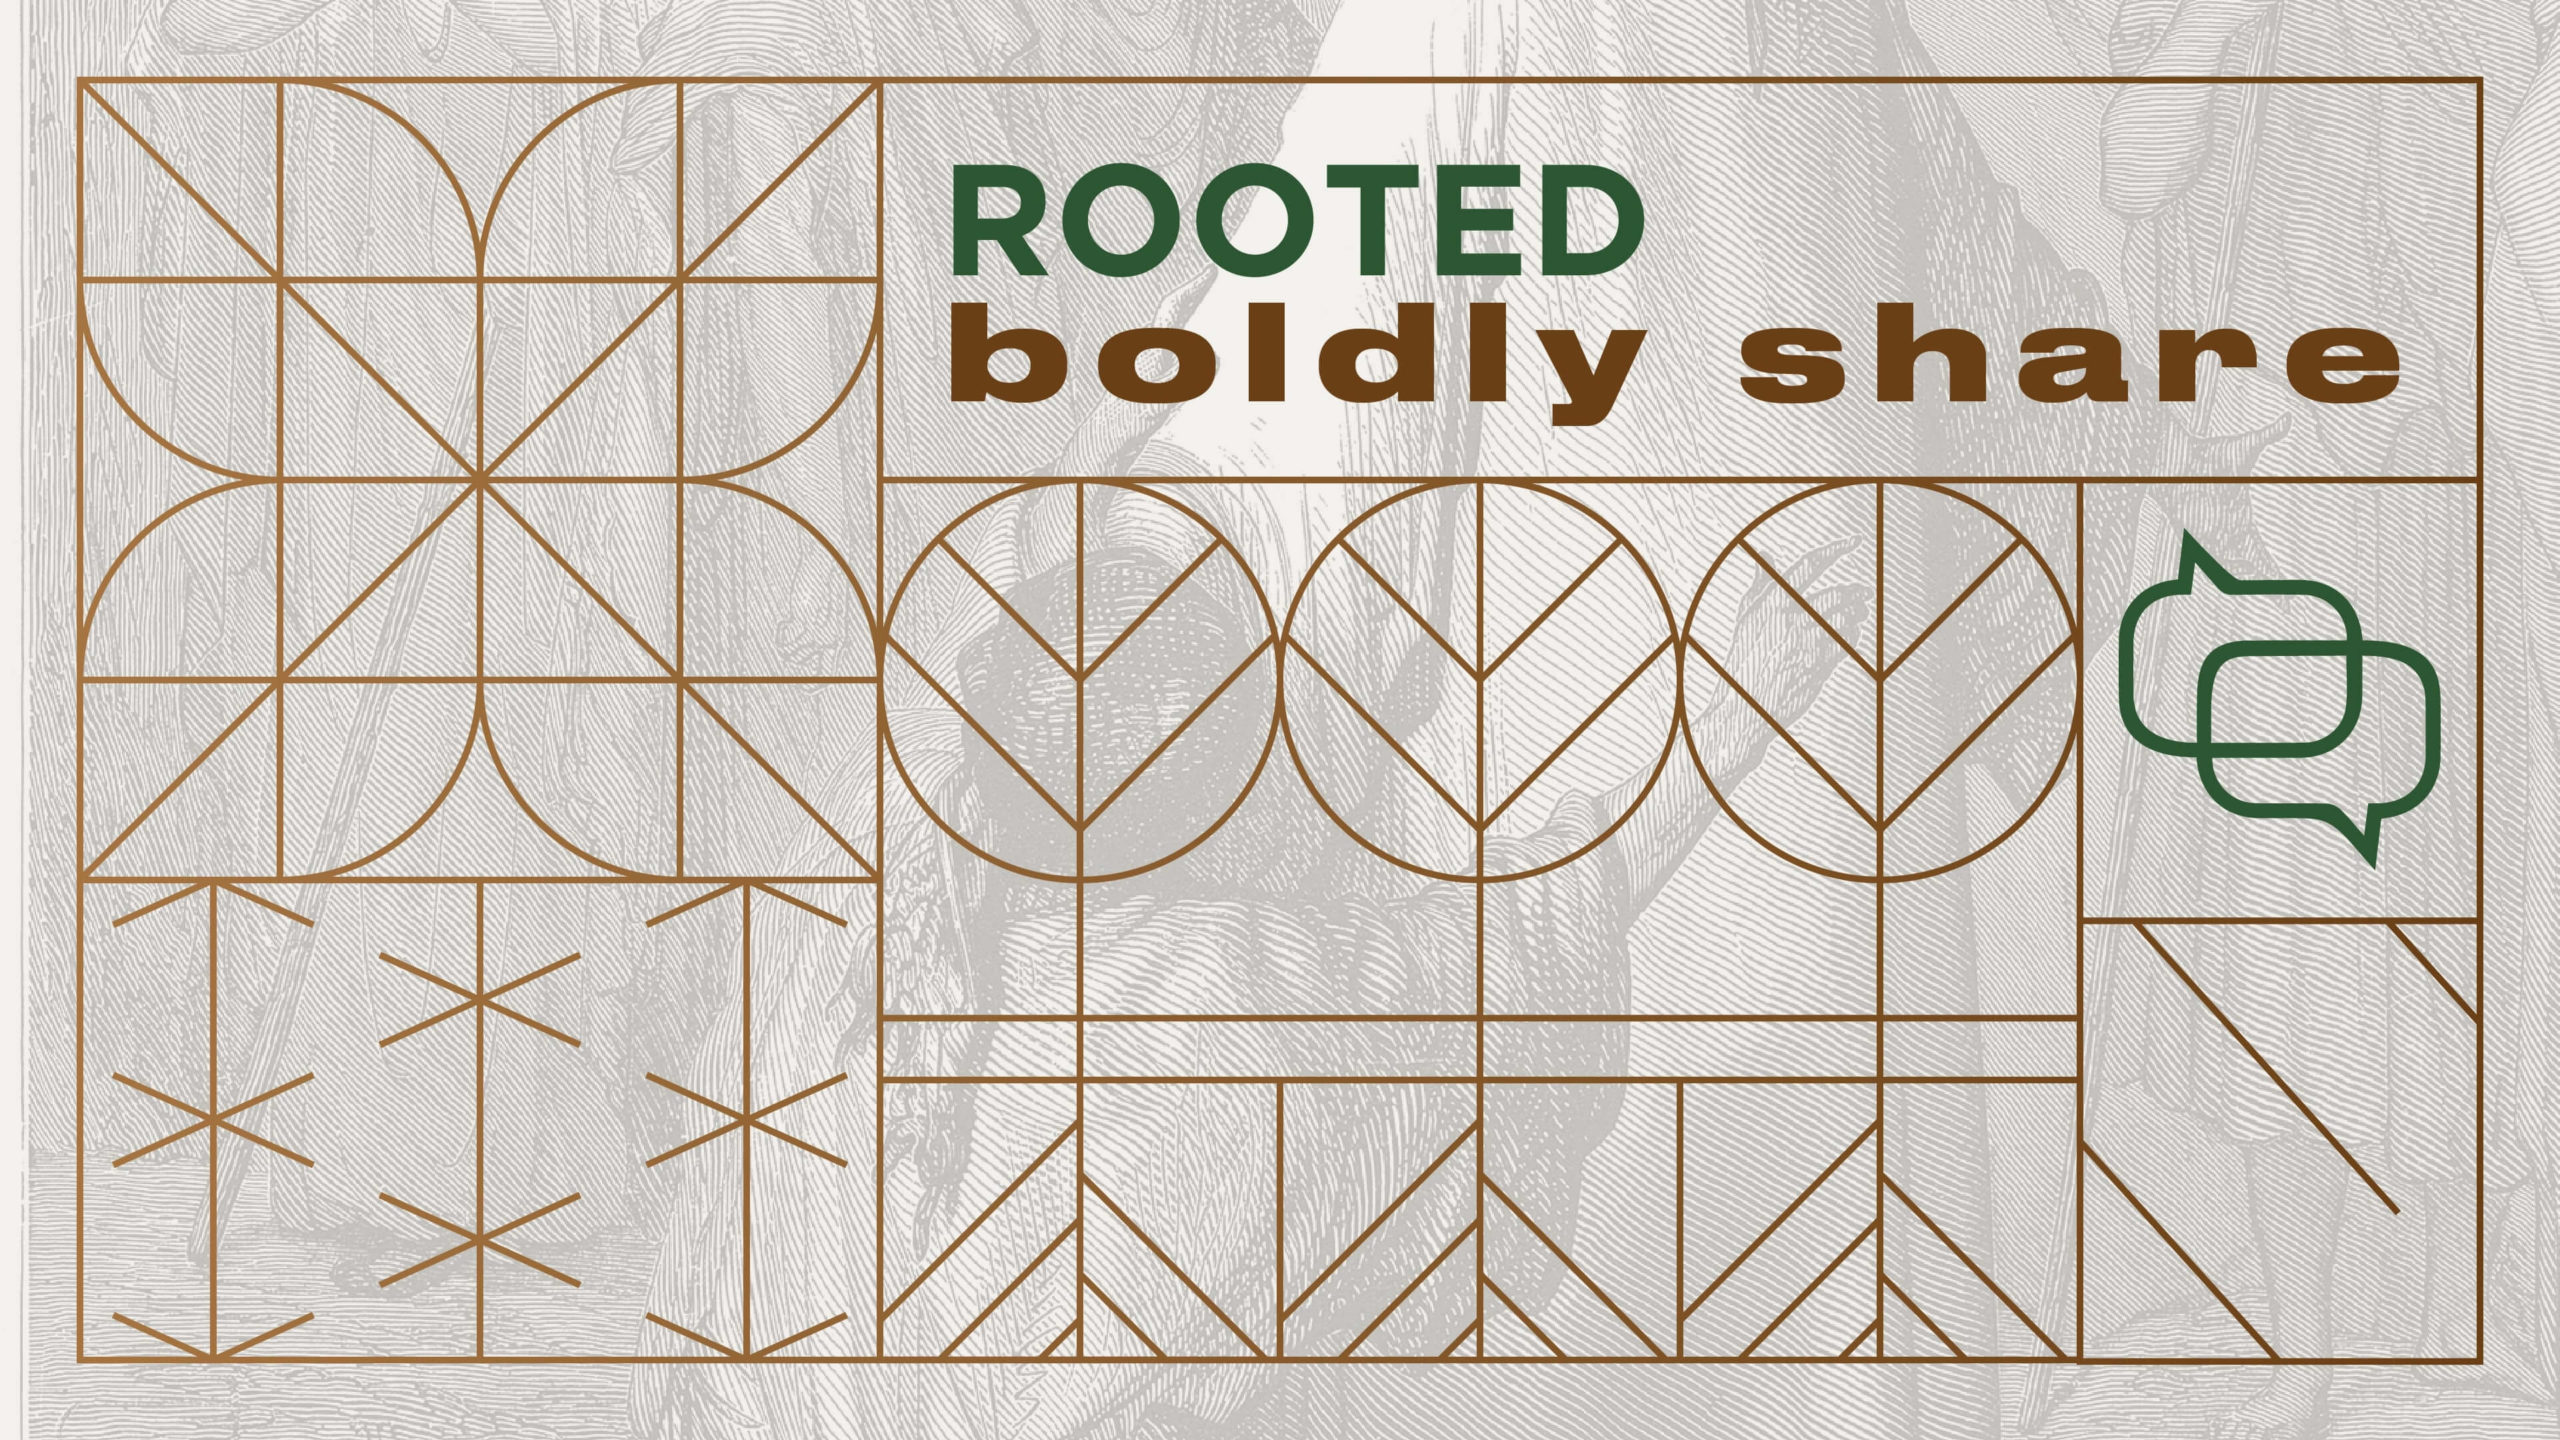 Rooted: Share Boldly